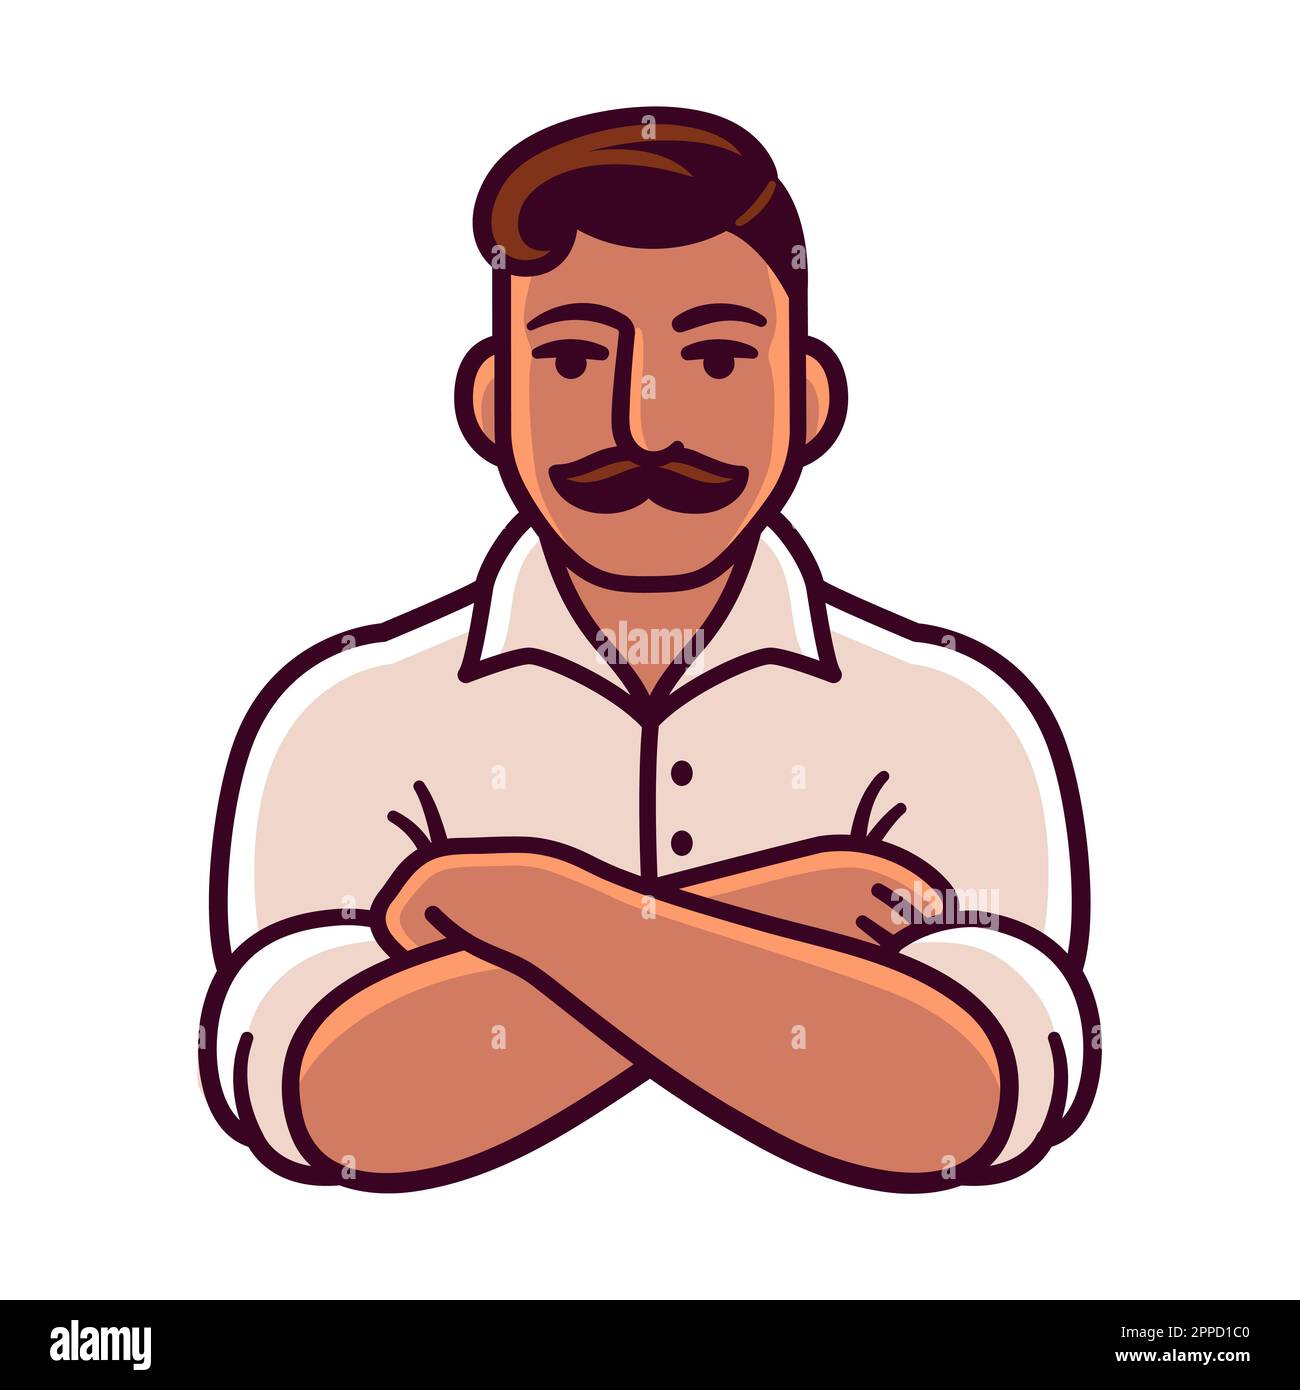 Drawing of man with mustache with arms crossed and rolled sleeves. Stylish old fashioned gentleman illustration. Stock Vector